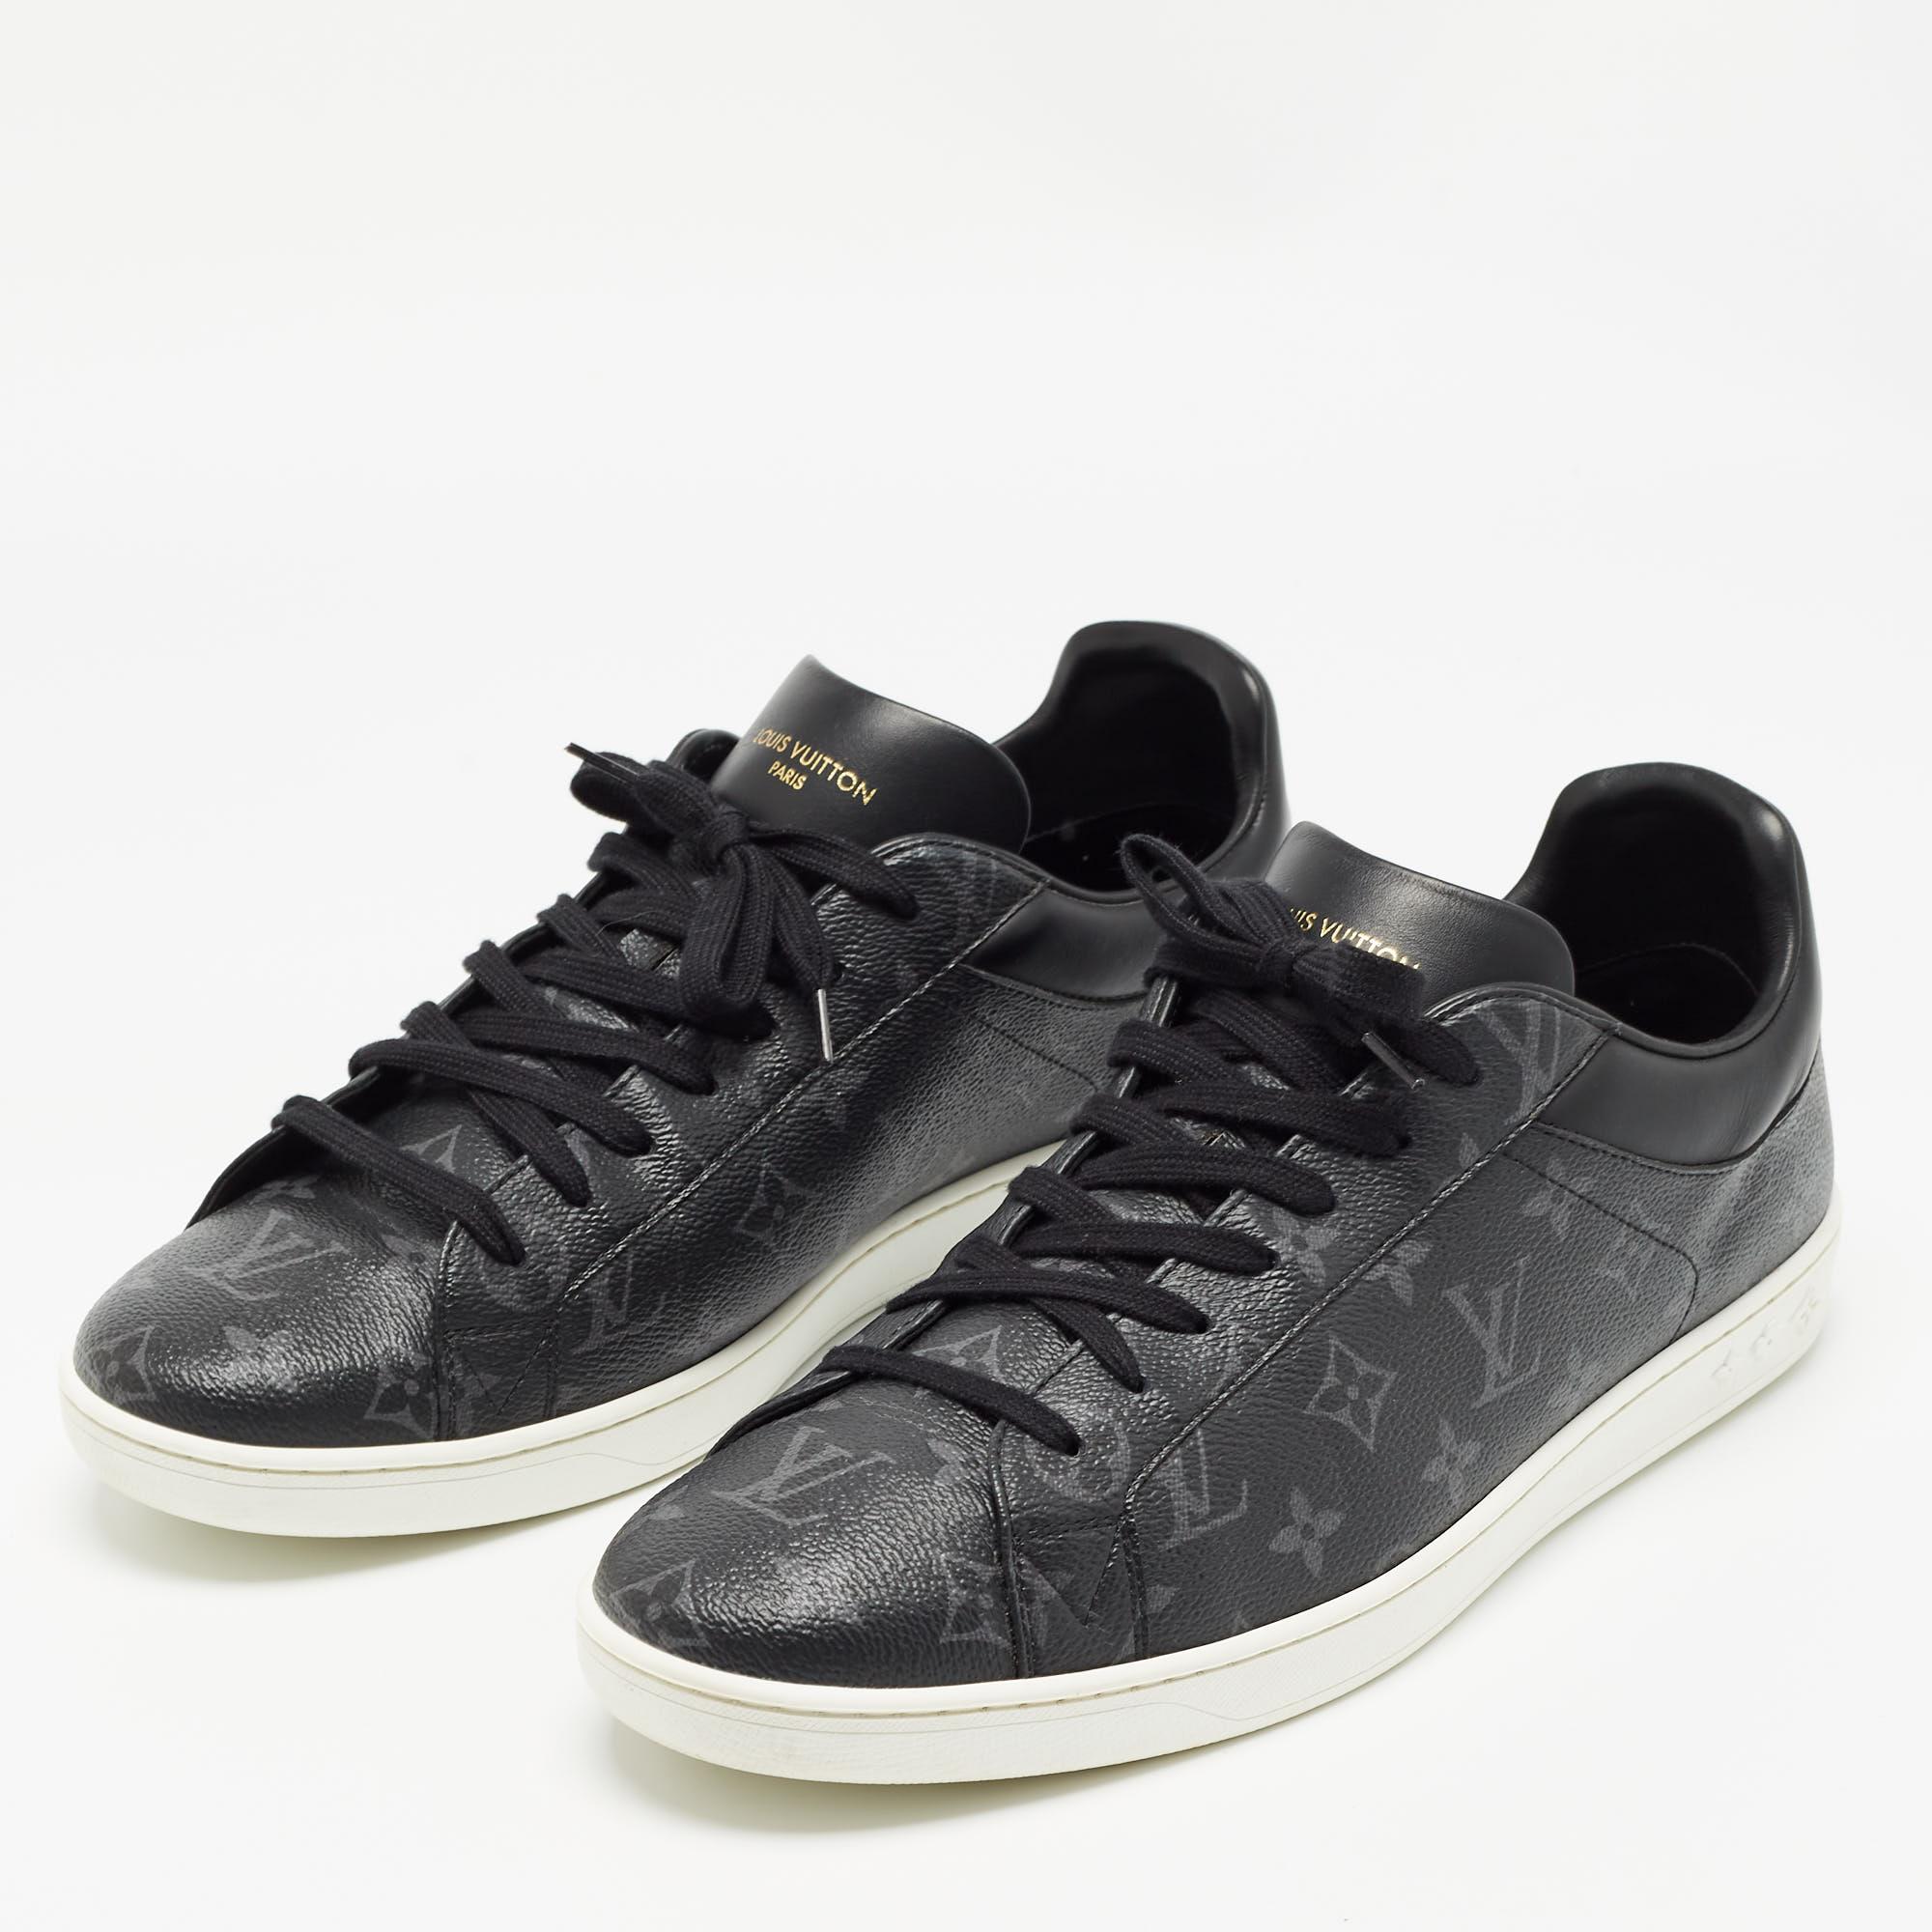 Louis Vuitton Monogram Eclipse Luxembourg Sneakers Size 46 2